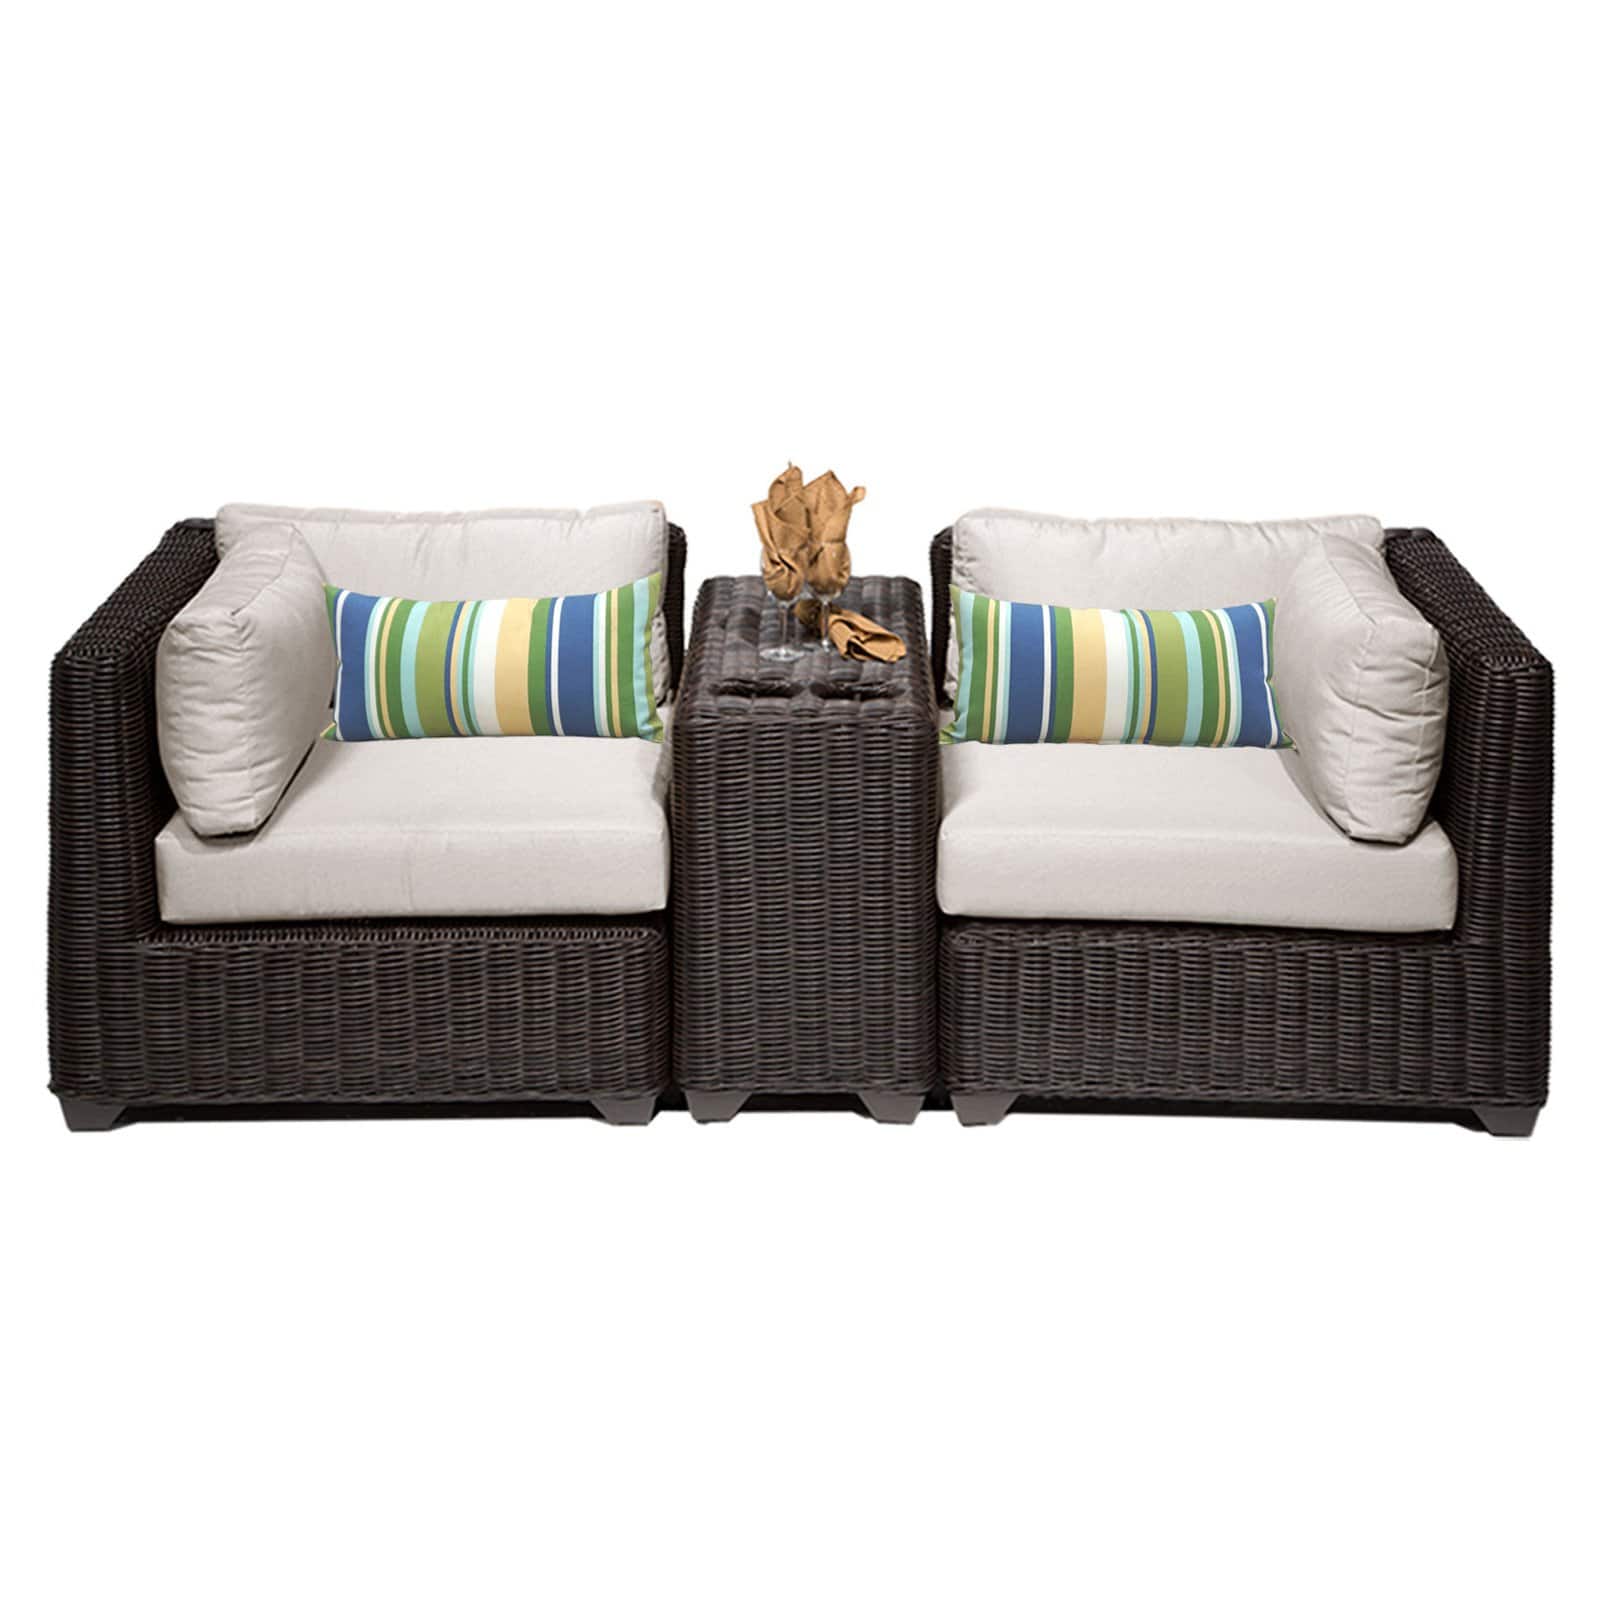 TK Classics Venice Wicker 3 Piece Patio Conversation Set with Cup Table and 2 Sets of Cushion Covers - image 2 of 3